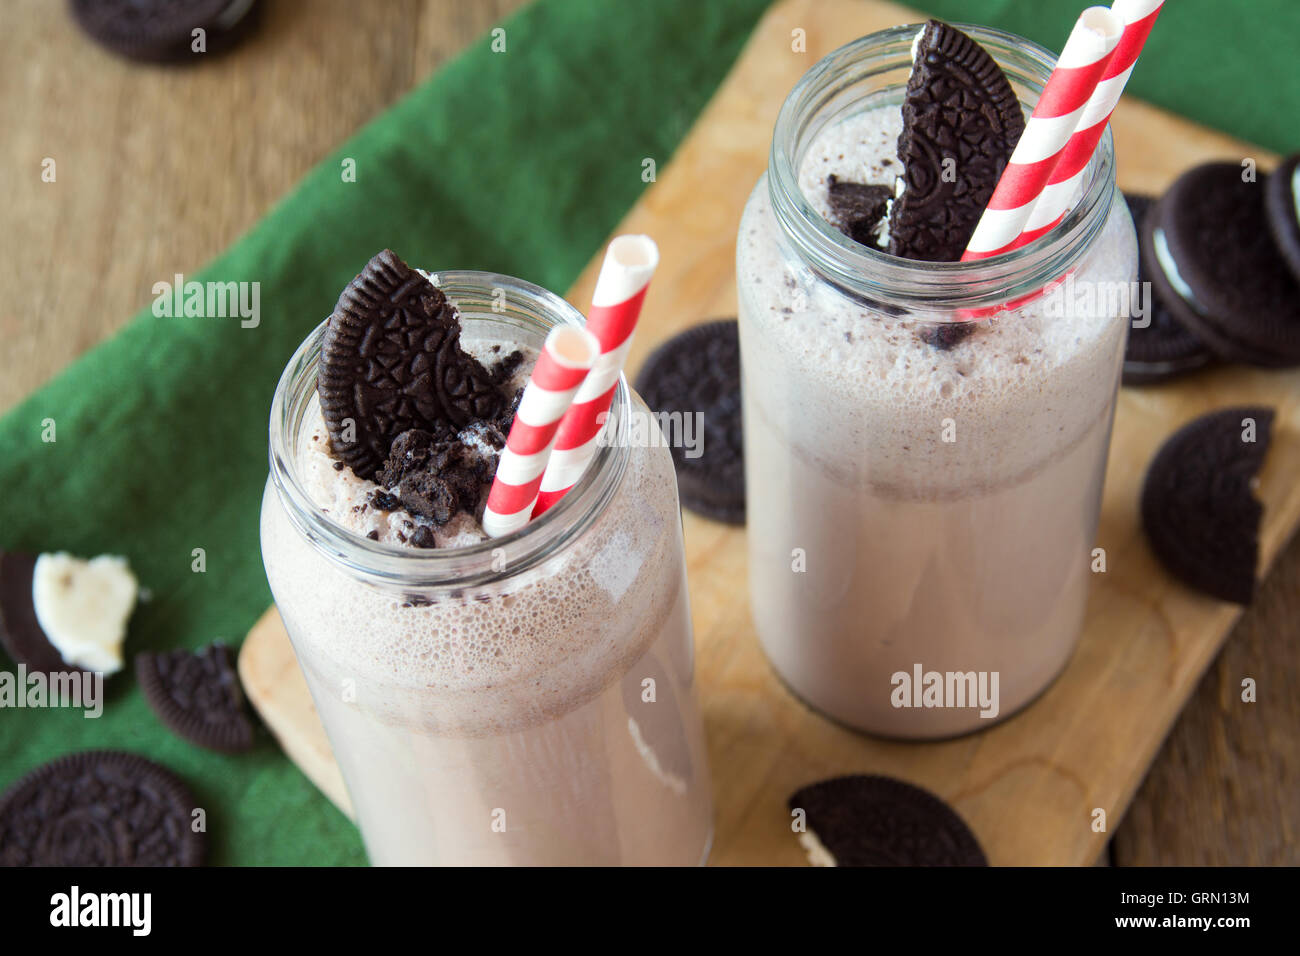 Oreo Shake High Resolution Stock Photography and Images - Alamy